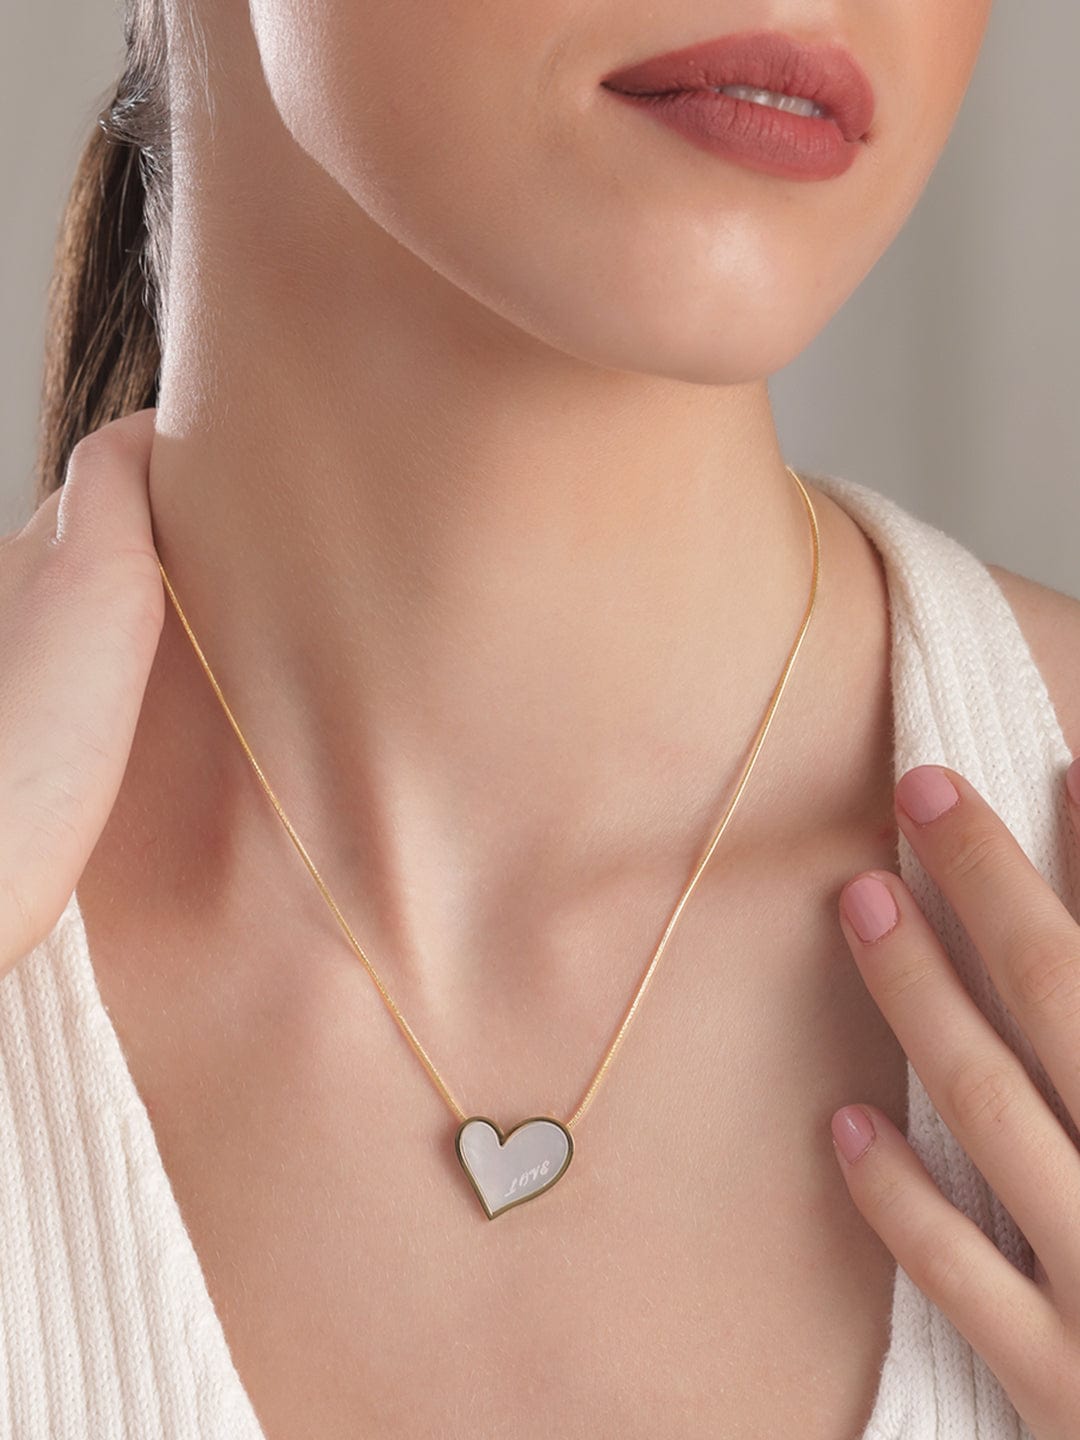 Heart Locket Necklace, Gold Locket Necklace, Large Locket Pendant Neck –  Love, Lily and Chloe